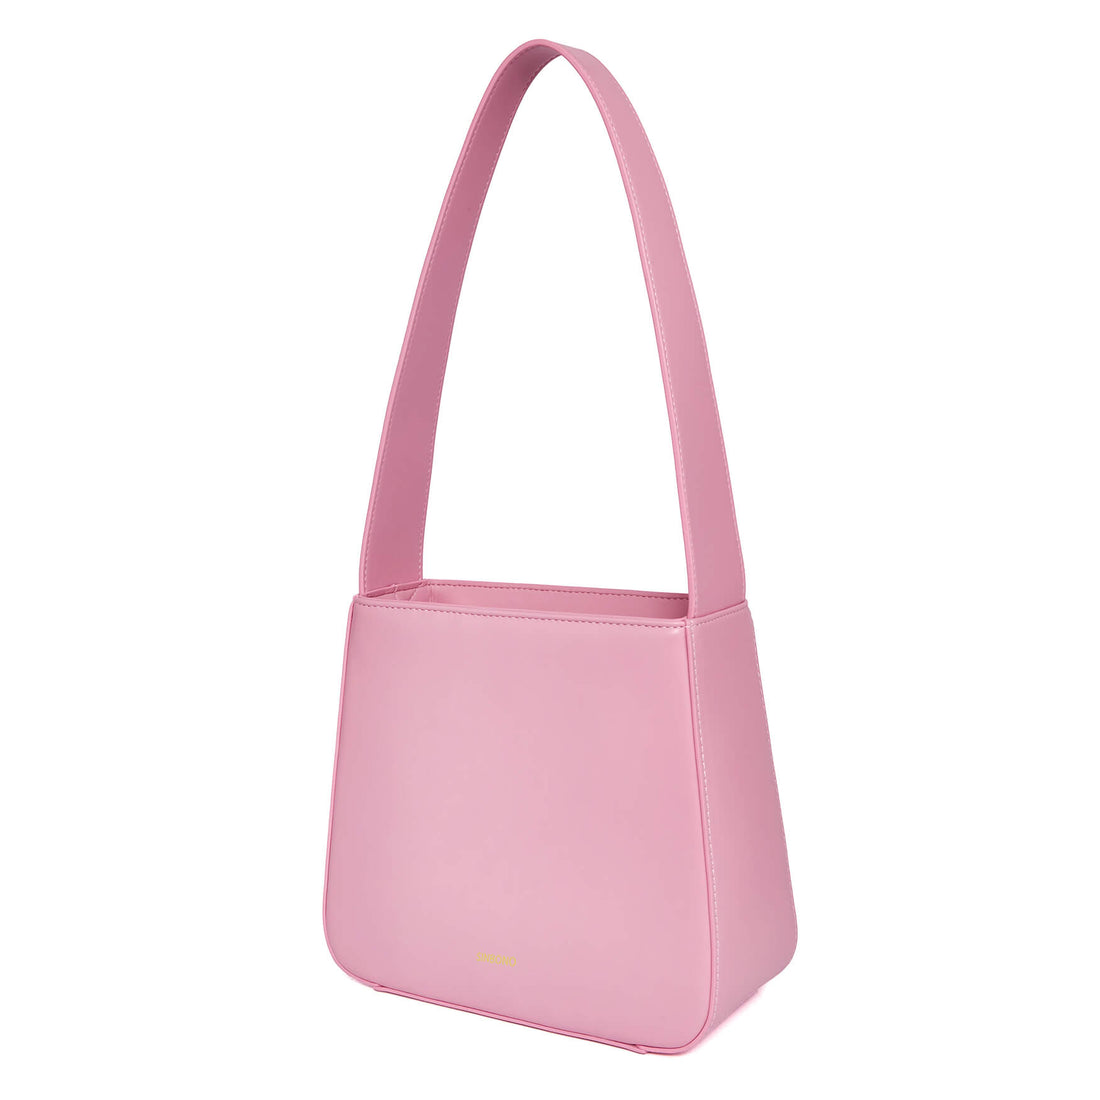 SINBONO Betty Shoulder Bag Pink - Faux Suede Lining Bag